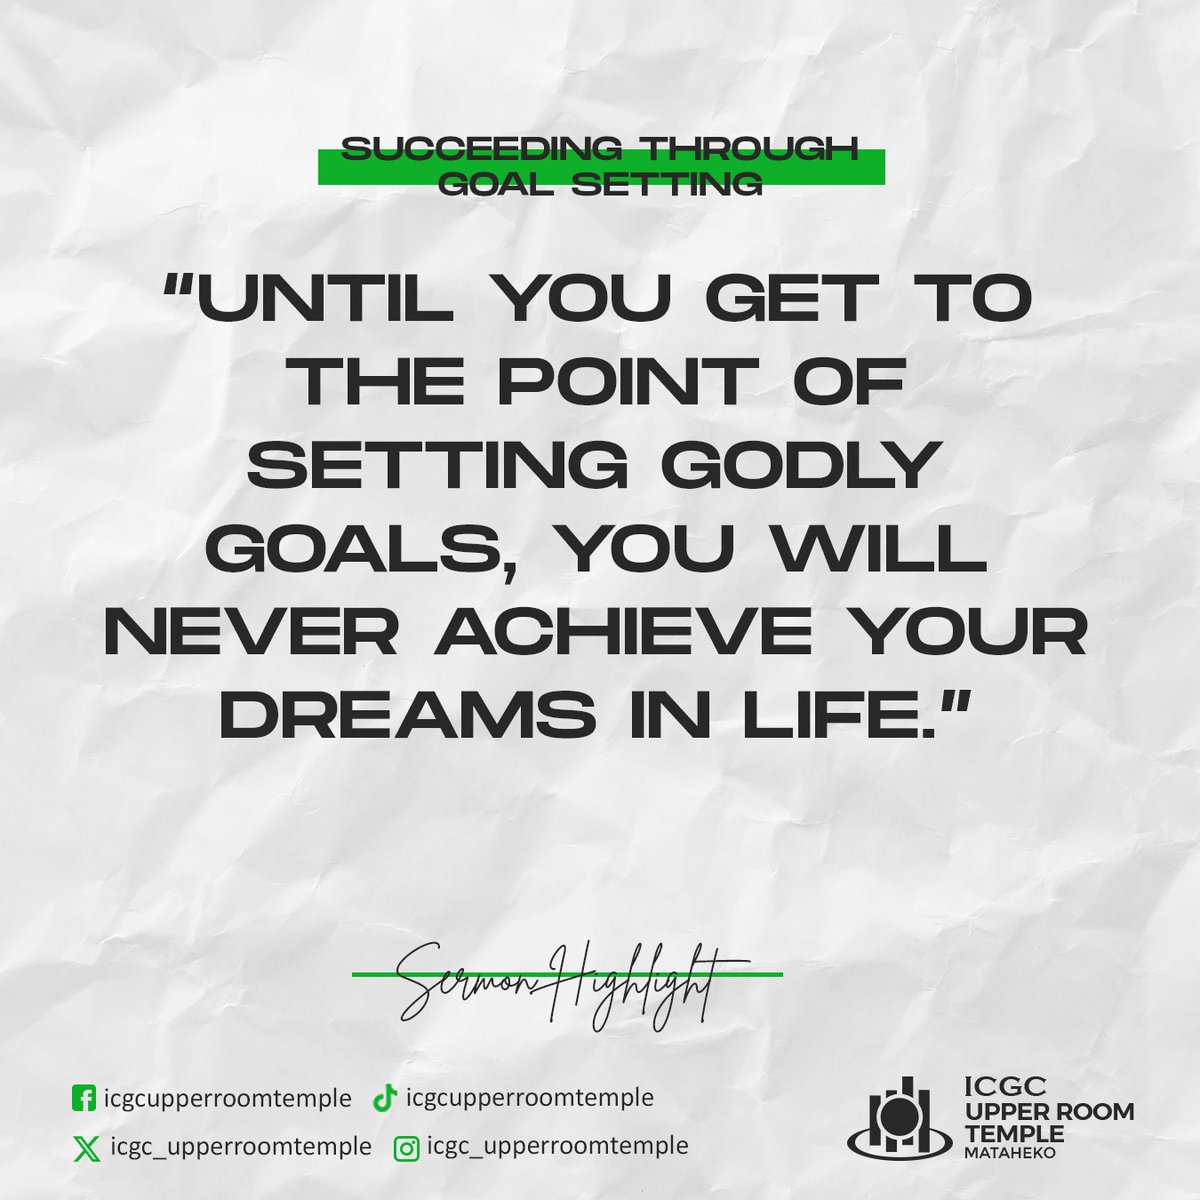 #WordOfTheDay | Until you get to the point of setting Godly goals...

#WeAreICGC | #ICGCUpperRoomTemple